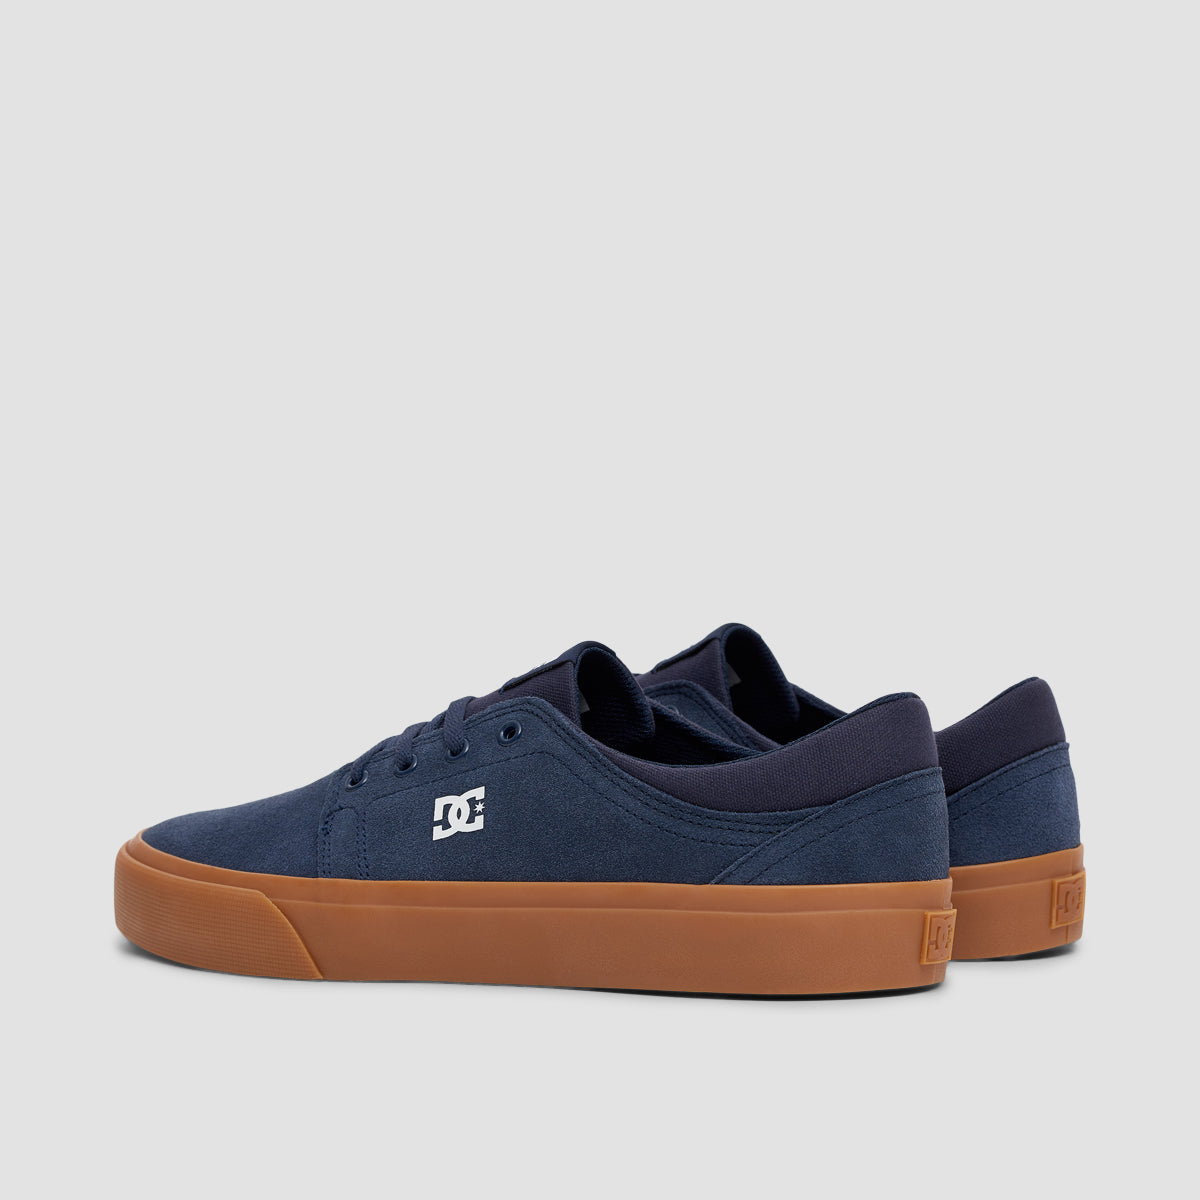 DC Trase SD Shoes - Navy/Gum